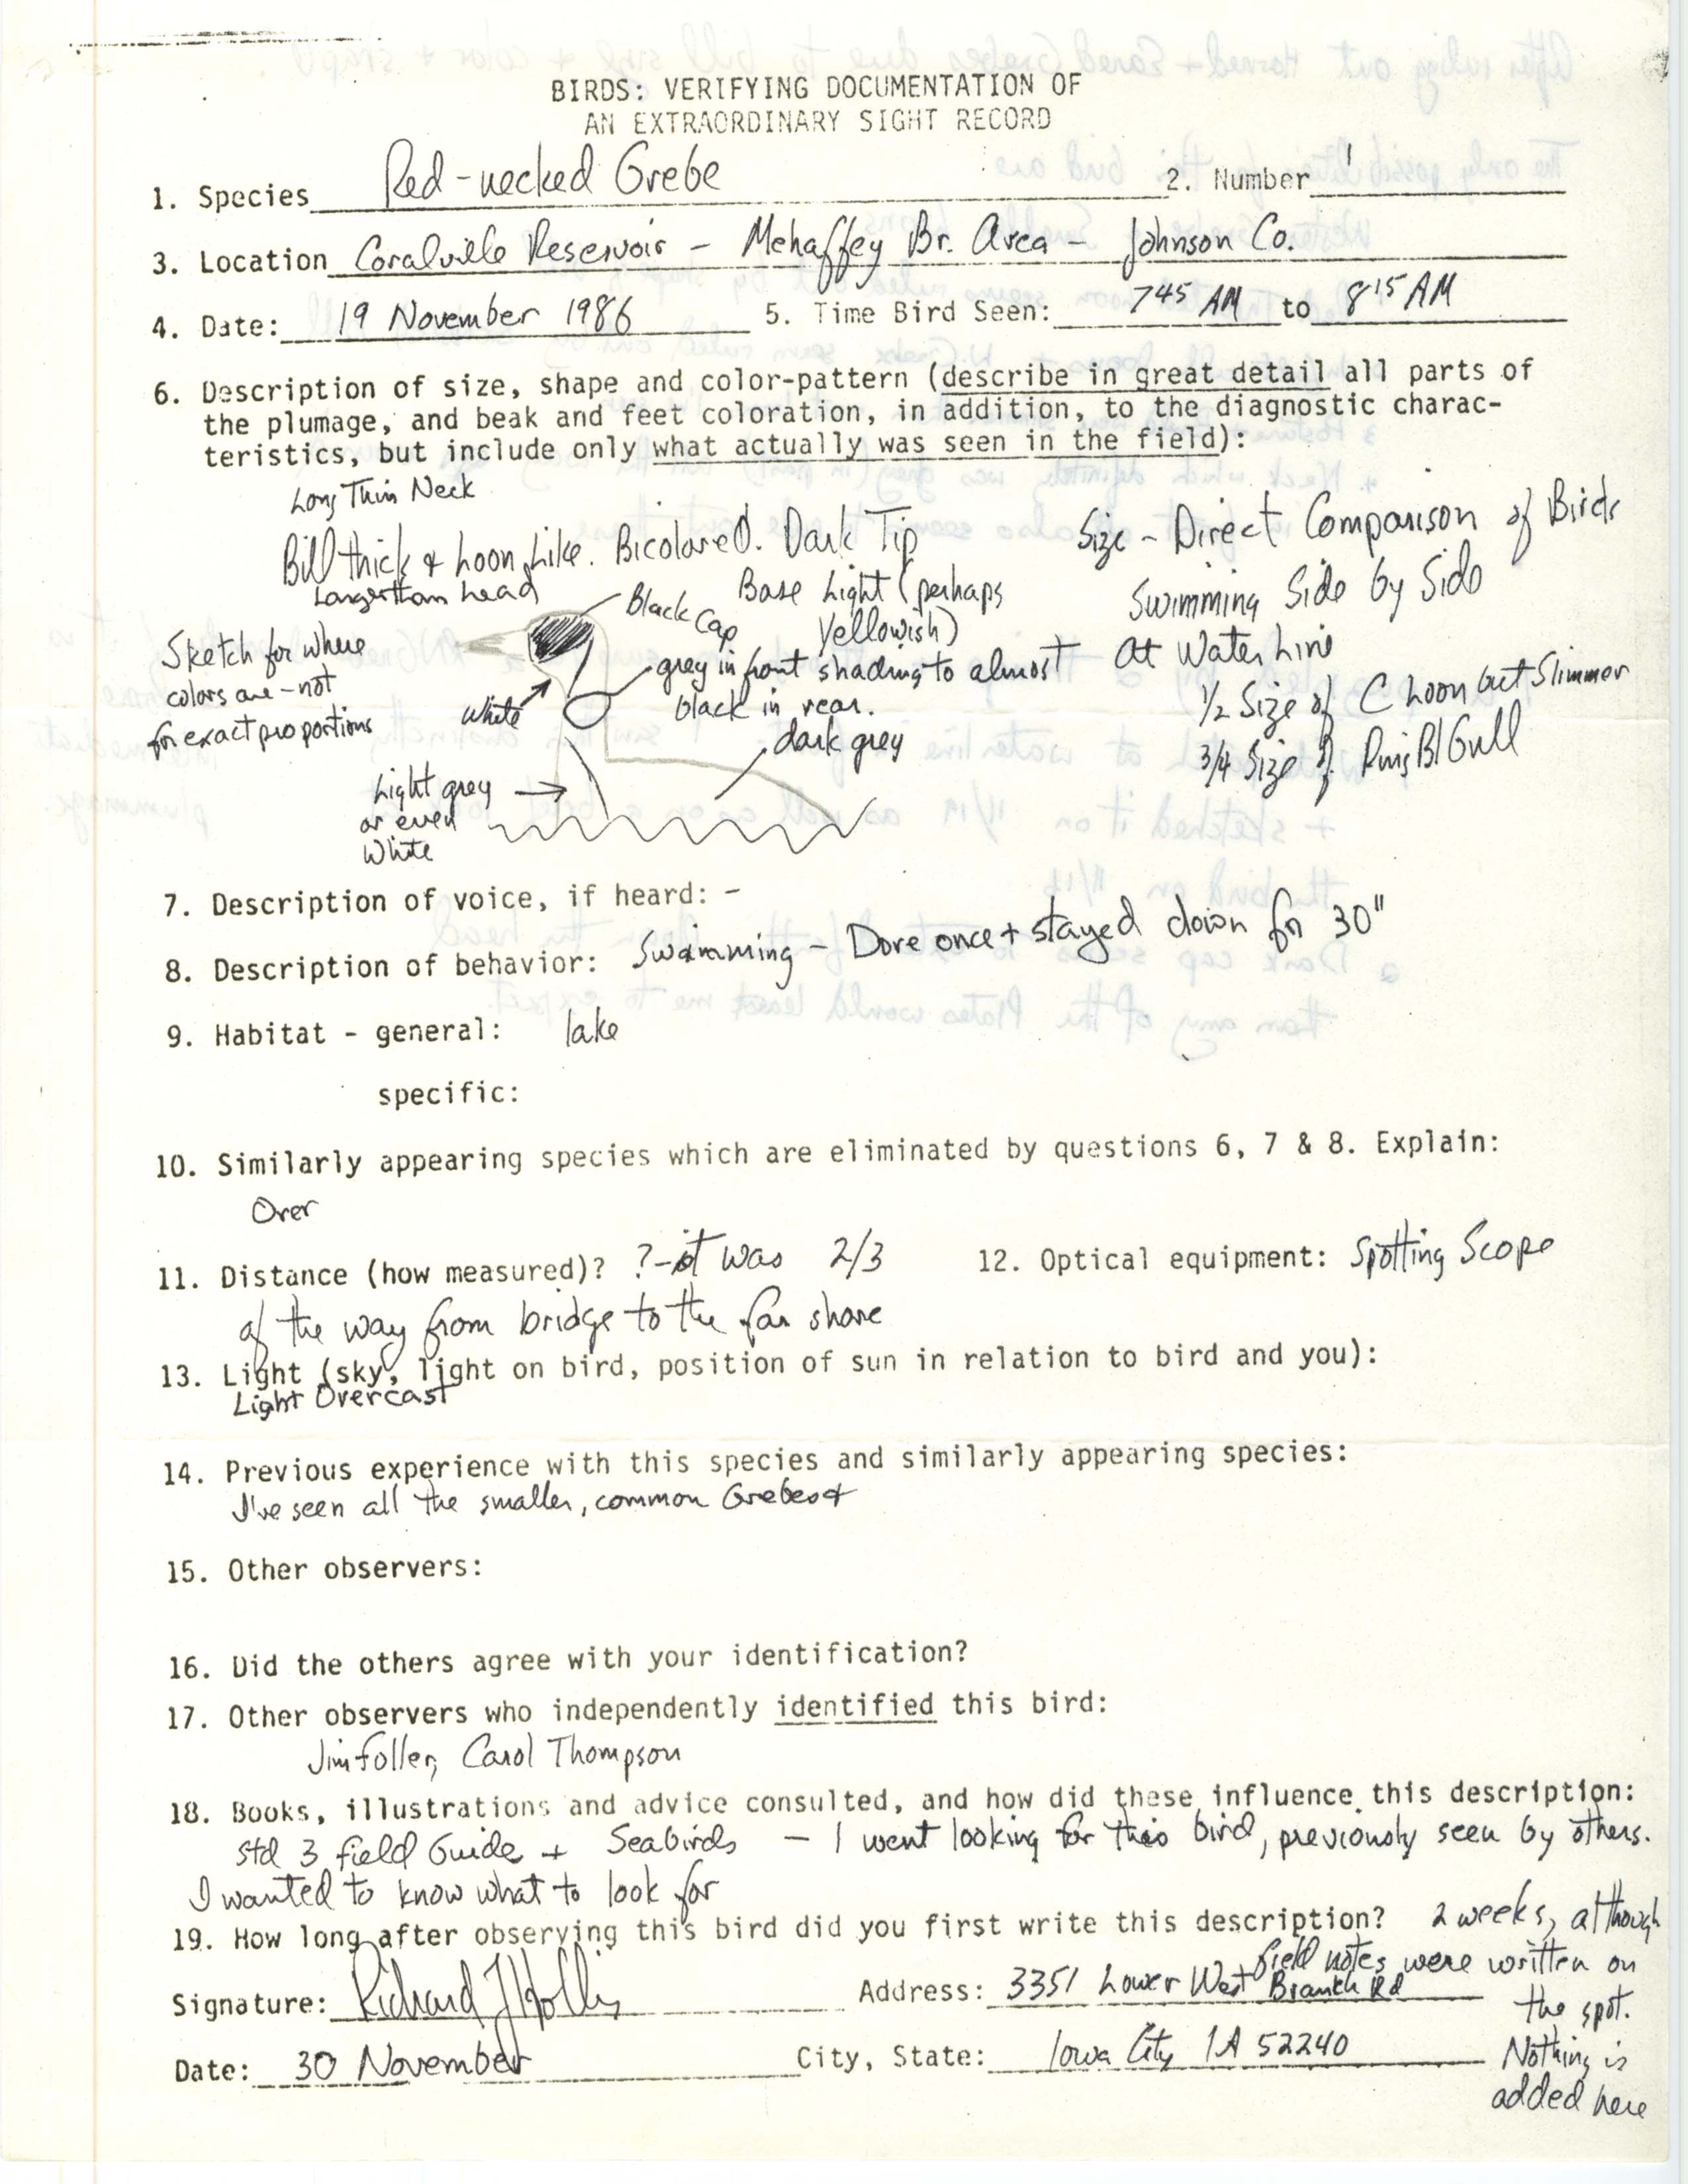 Rare bird documentation form for Red-necked Grebe at the Mehaffey Bridge area at Coralville Reservoir, 1986